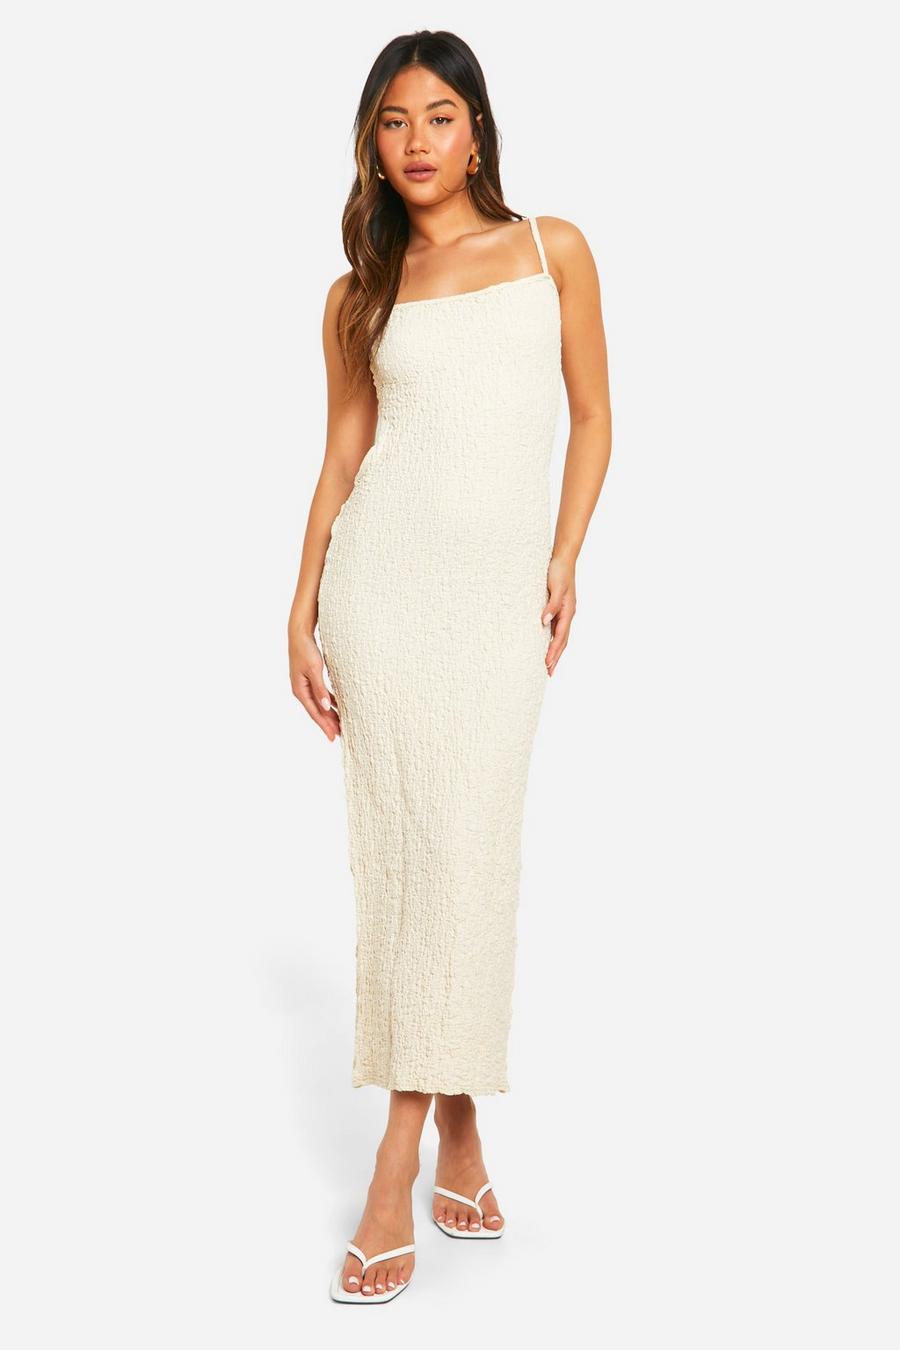 White Textured Cut Out Side Maxi Dress 